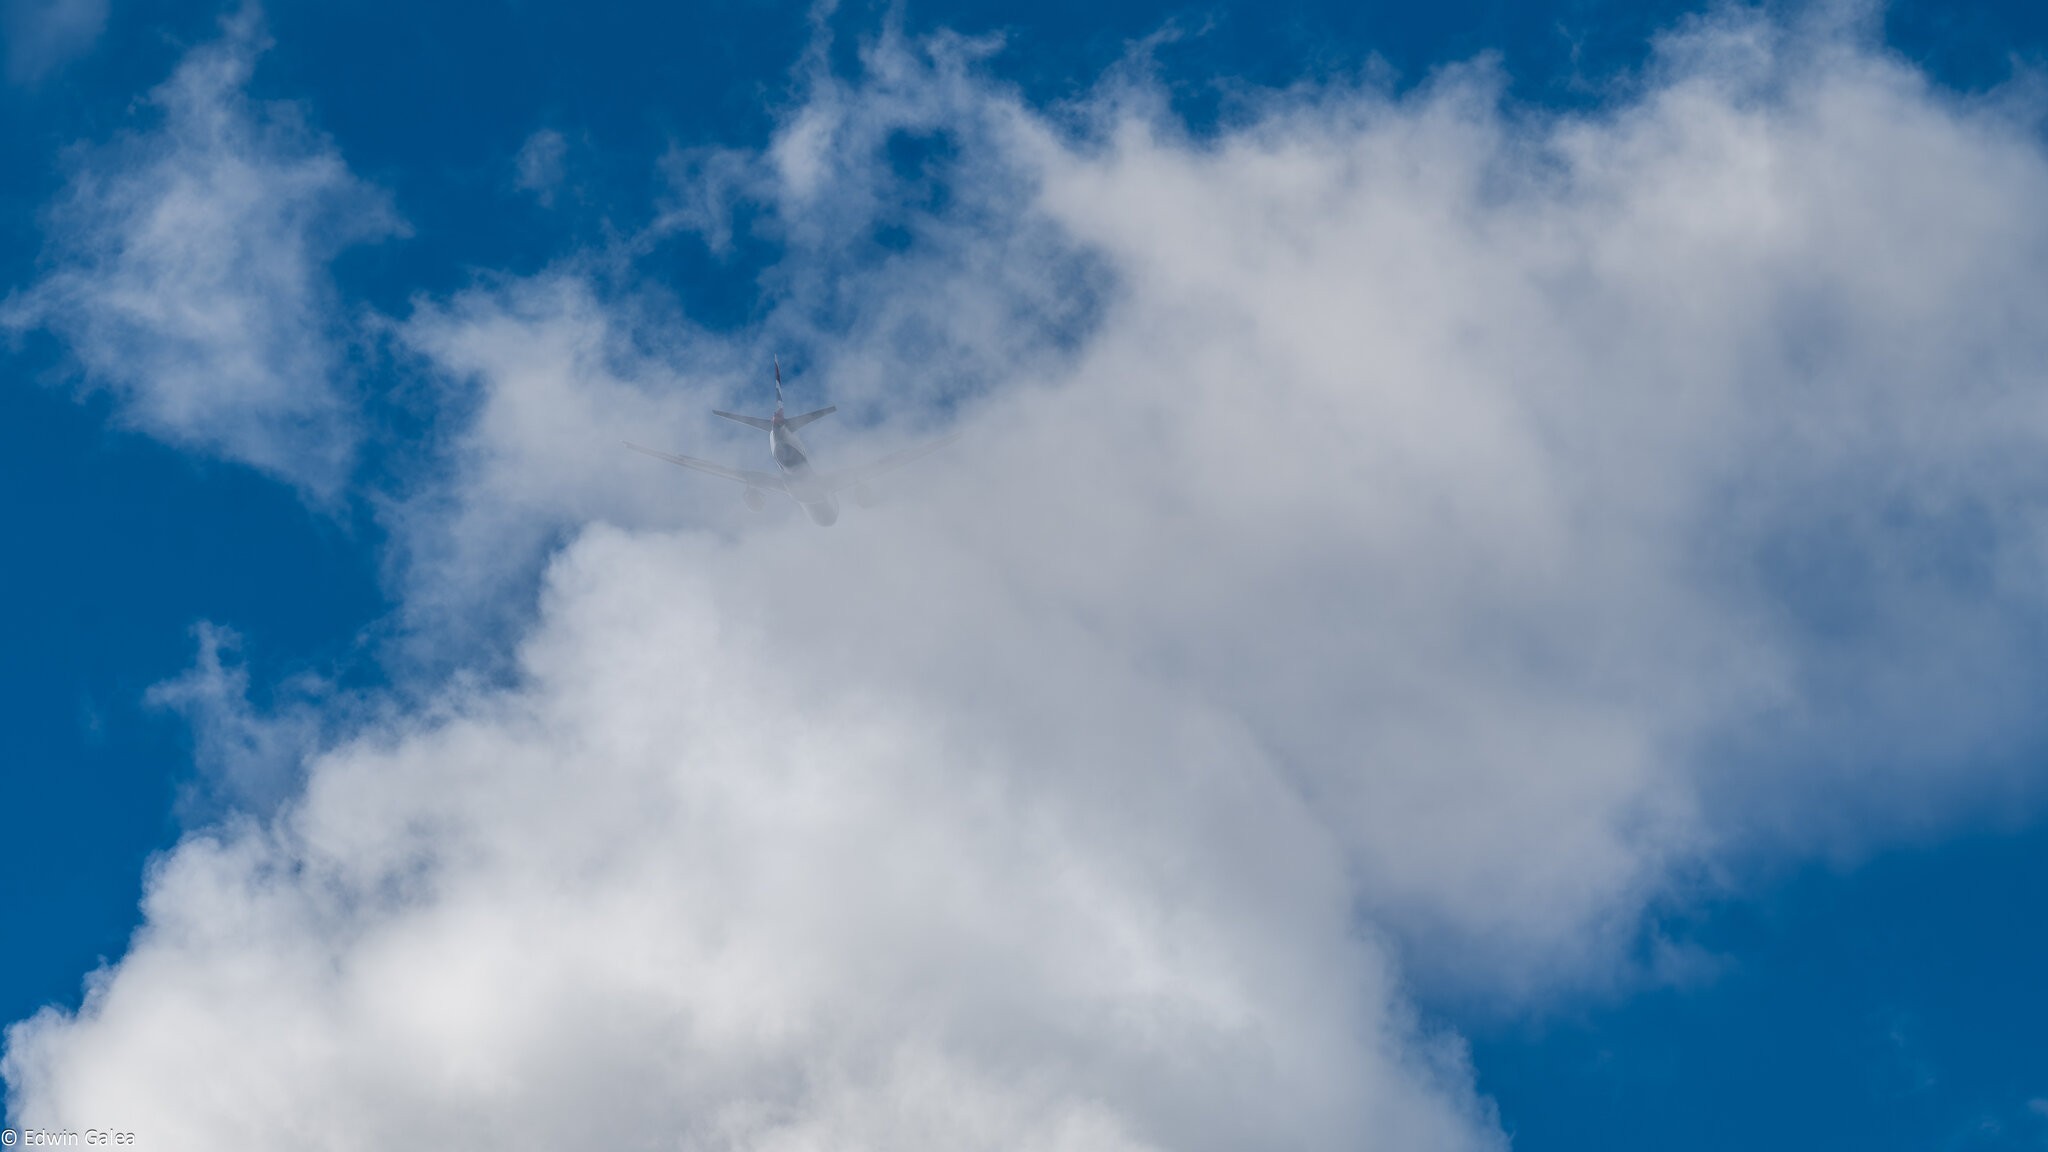 aircraft_in_clouds_hdr-2.jpg